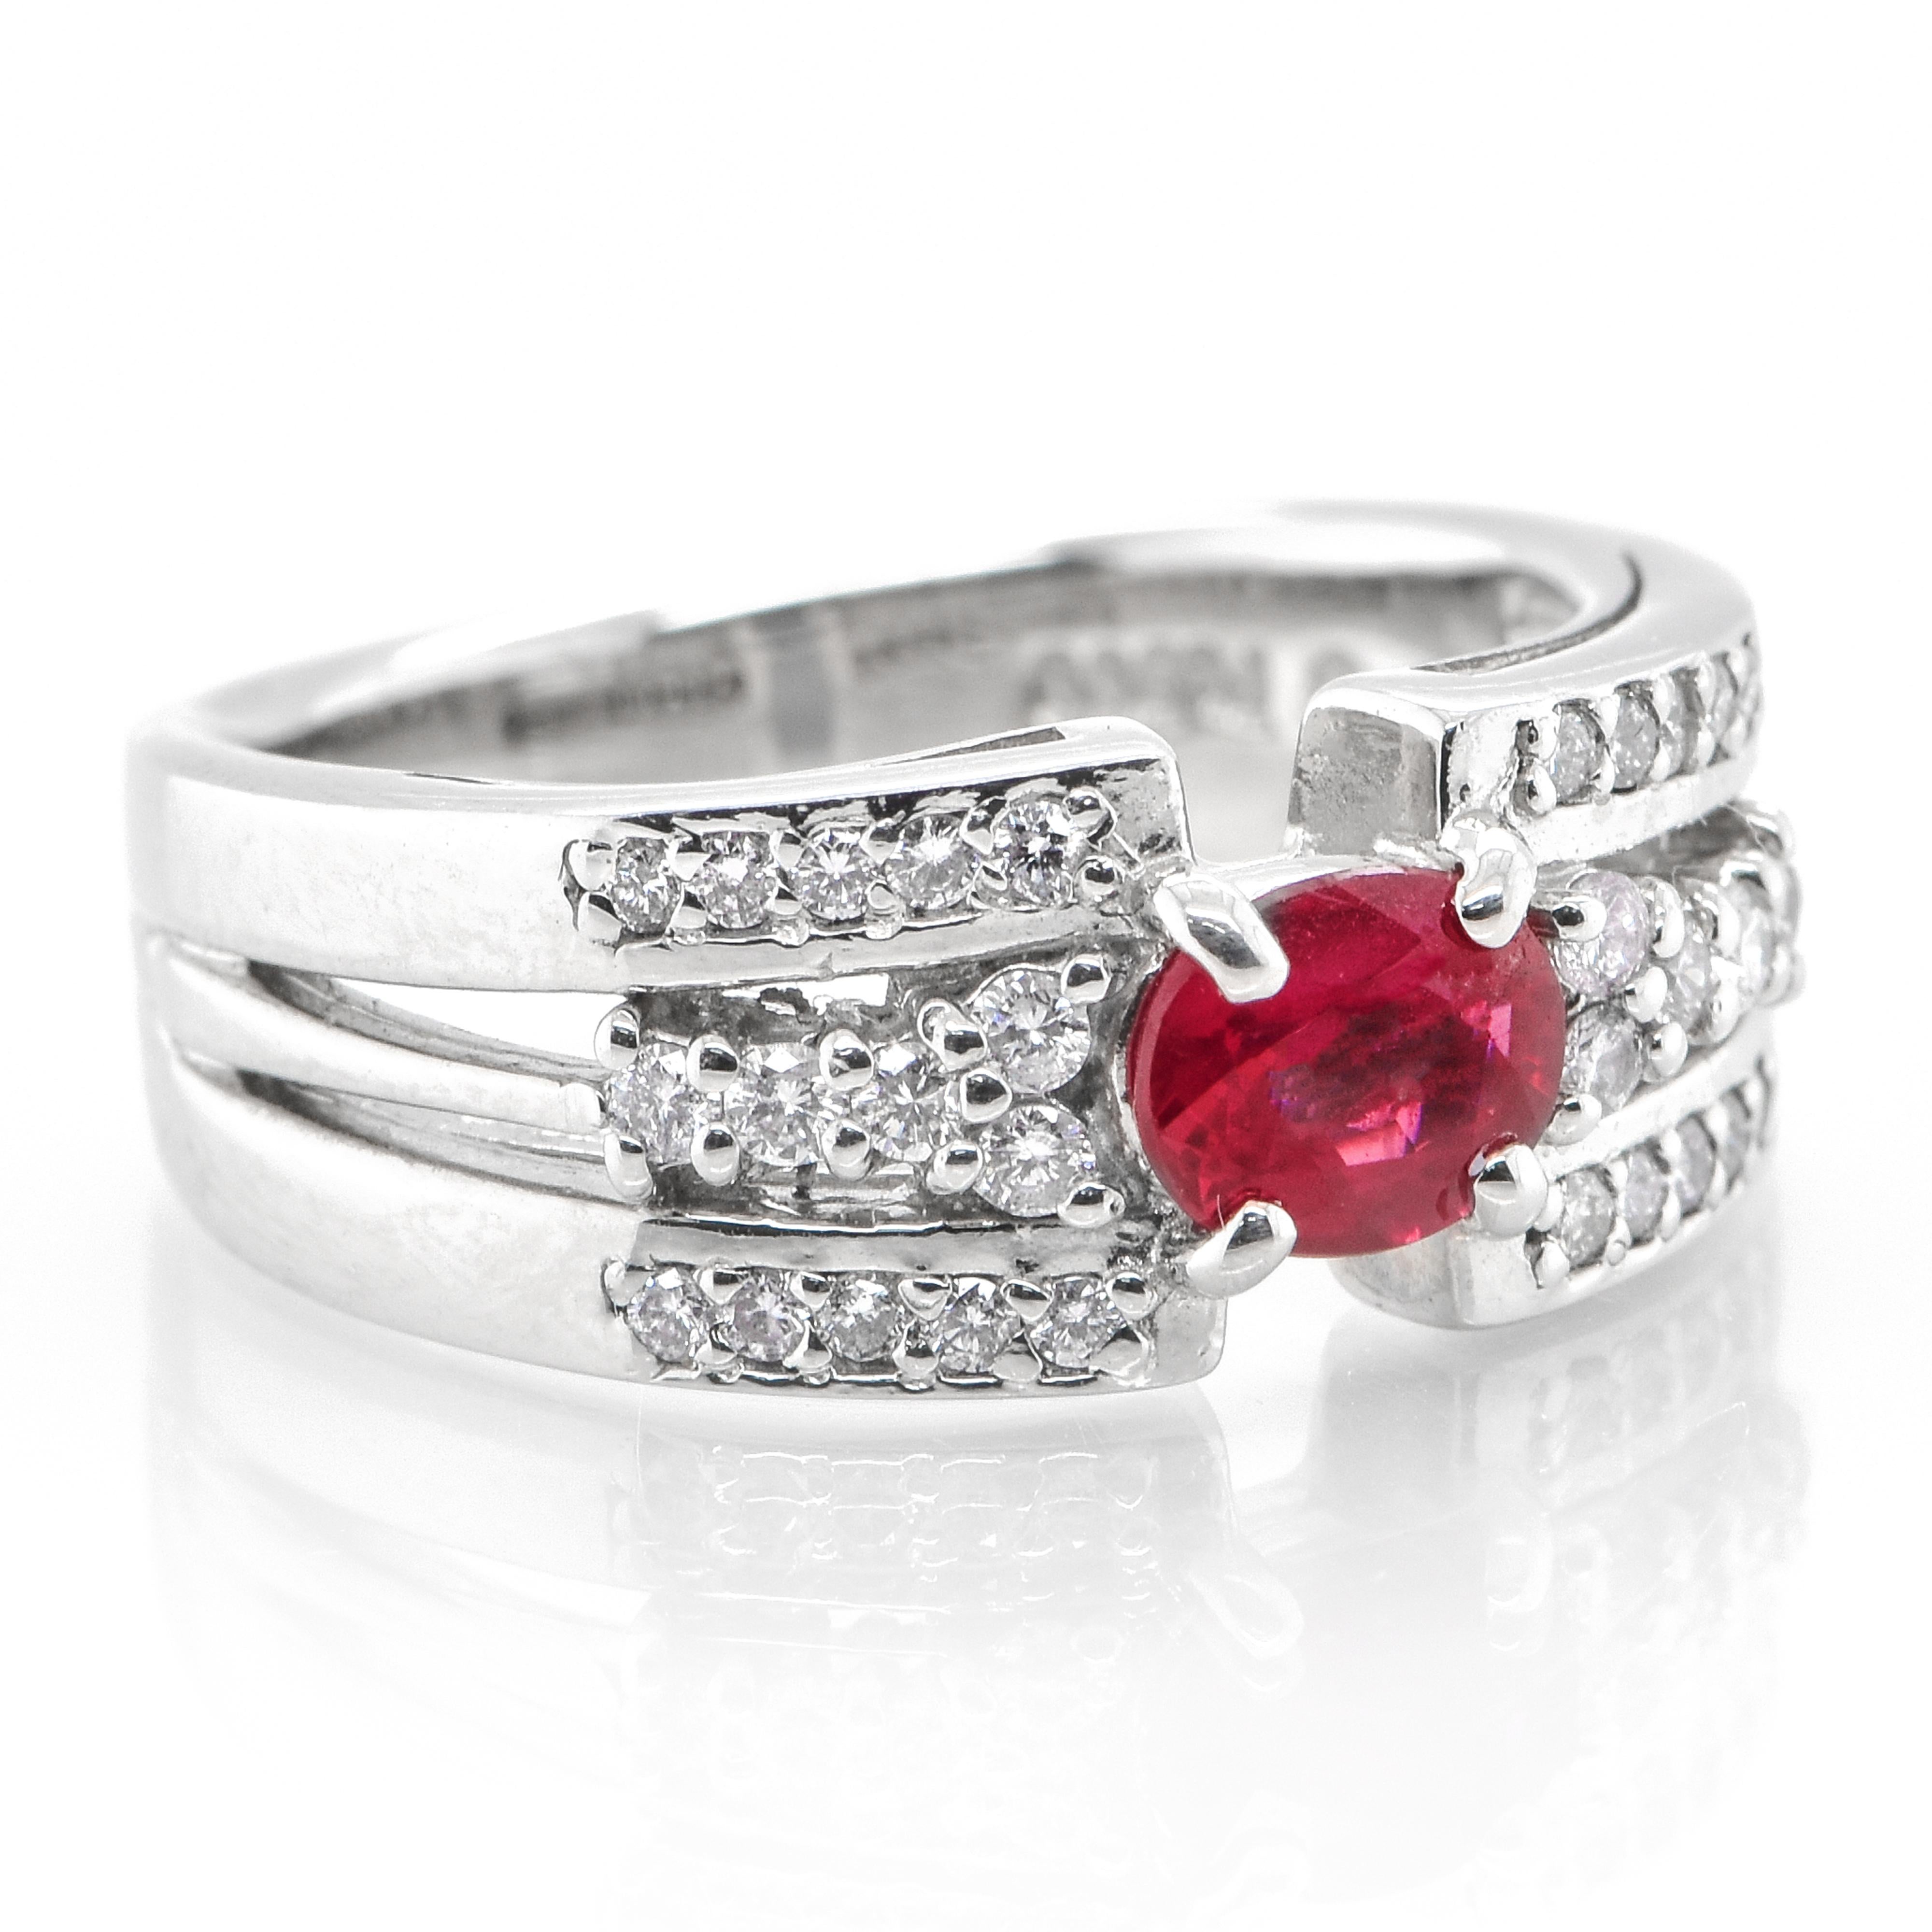 A beautiful ring set in Platinum featuring 0.73 Carats Natural Ruby and 0.28 Carat Diamonds. Rubies are referred to as 